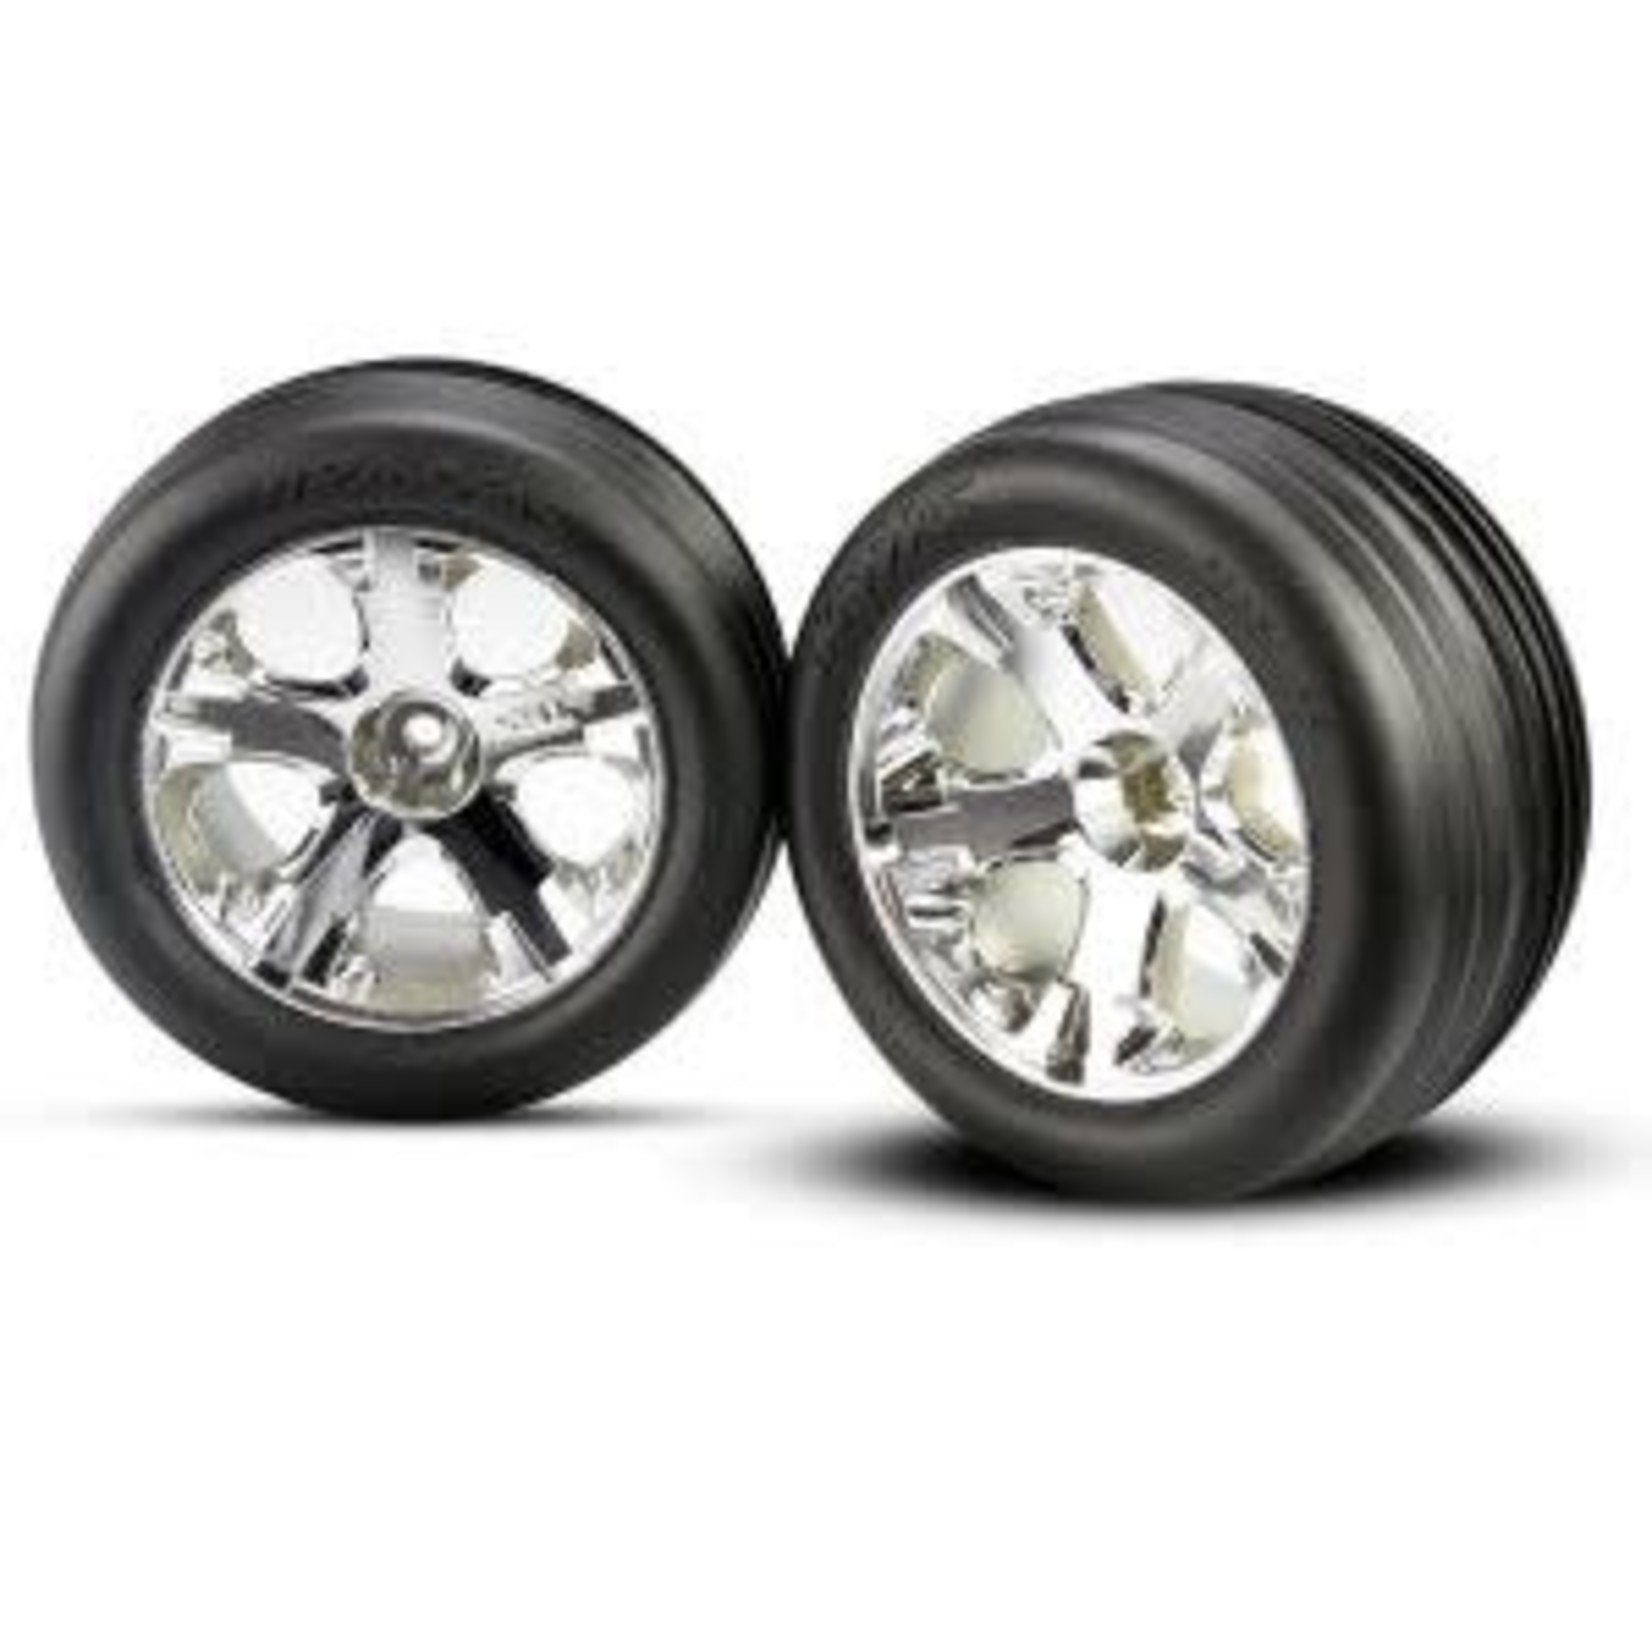 Traxxas 3771 Tires & wheels, assembled, glued (2.8') (All-Star chrome wheels, ribbed tires, foam inserts) (electric front) (2)